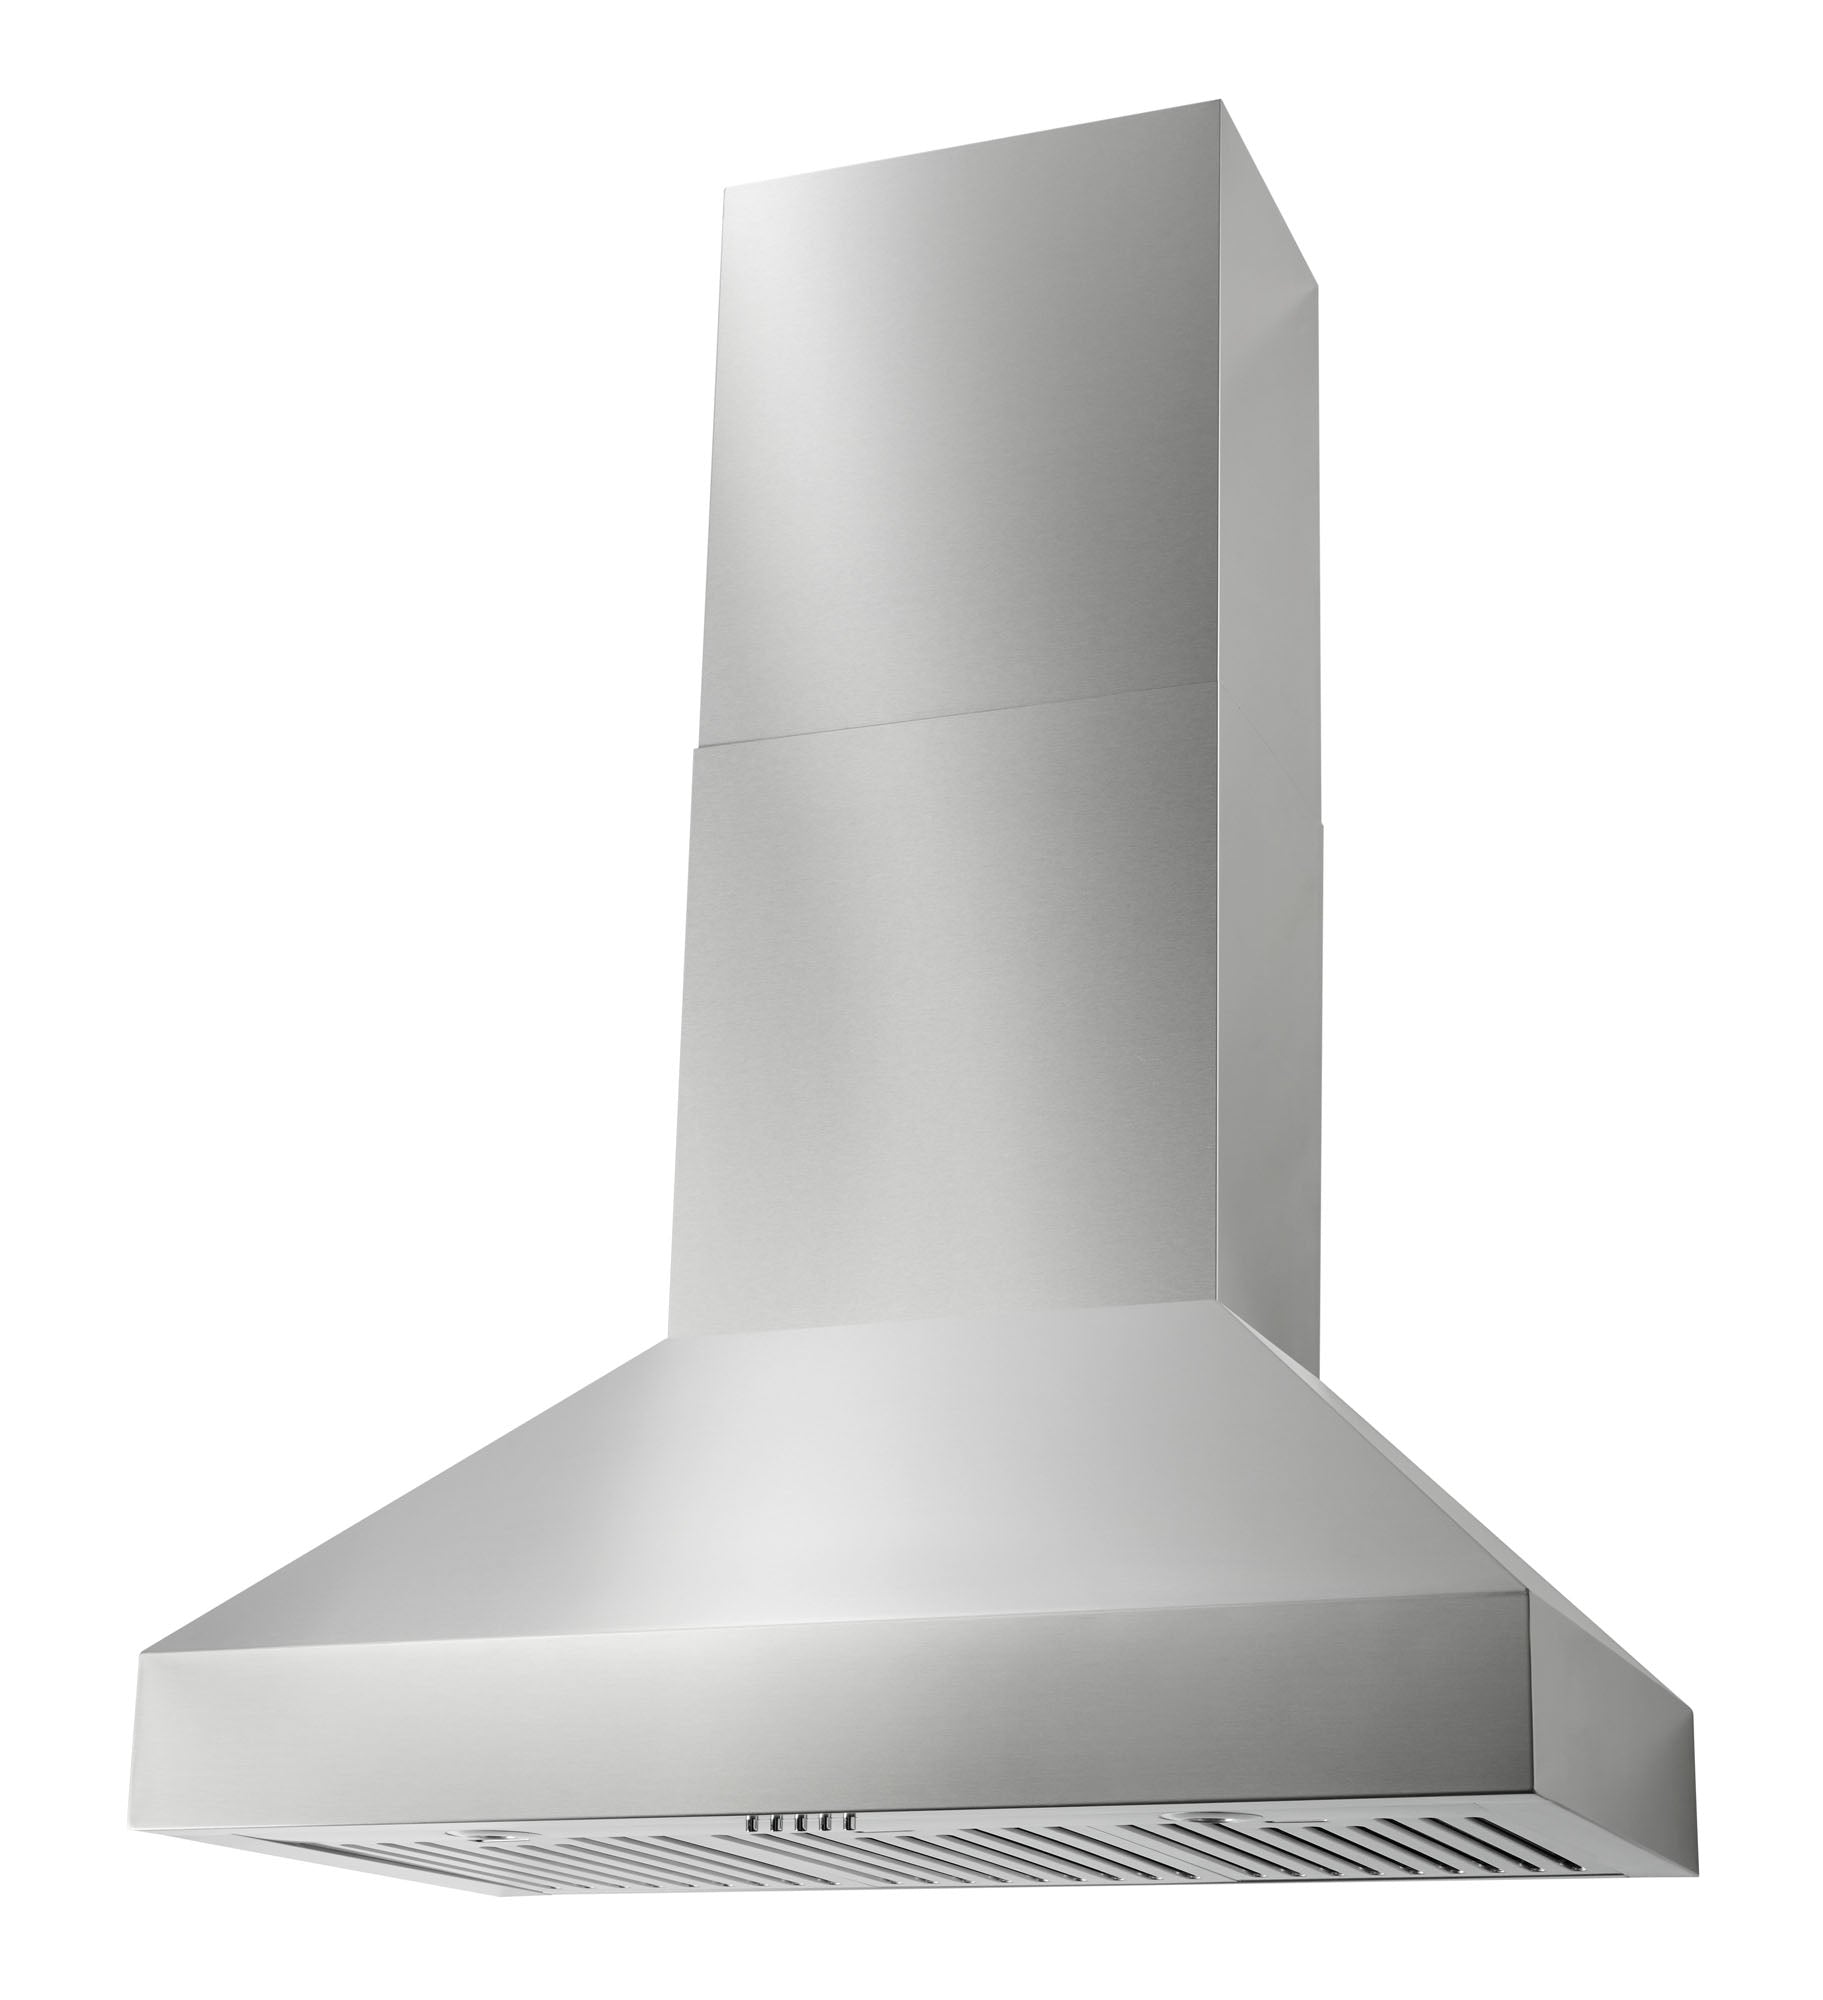 Thor Kitchen 36 Inch Wall Mount Hood, 14 inches Tall- Model TRH36P (Renewed)